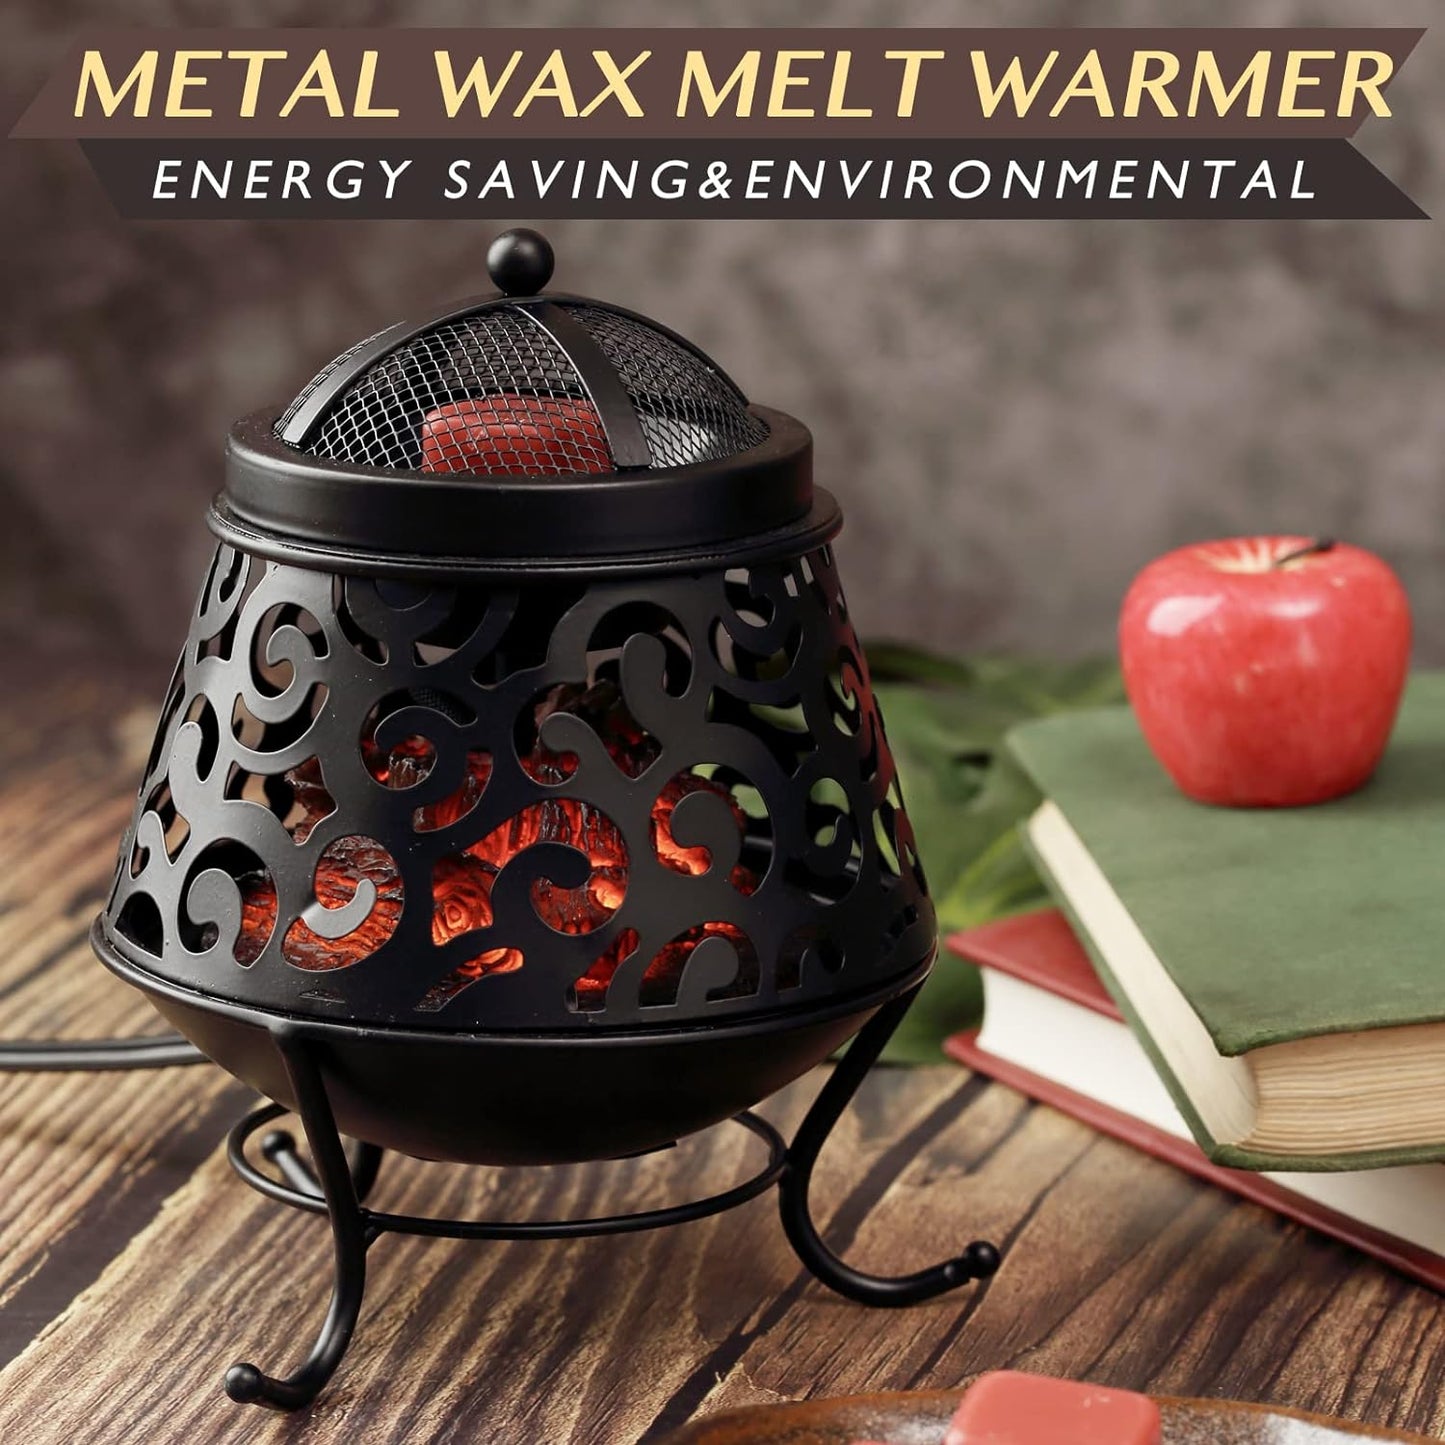 NAFANG Fireplace Wax Warmer,Wax Melt Warmer for Scented Wax Melts and Tarts,Electric Wax Warmer,Candle Wax Burner Fragrance Warmer for Home Decor Spa and Aromatherapy(Dustproof Glass)